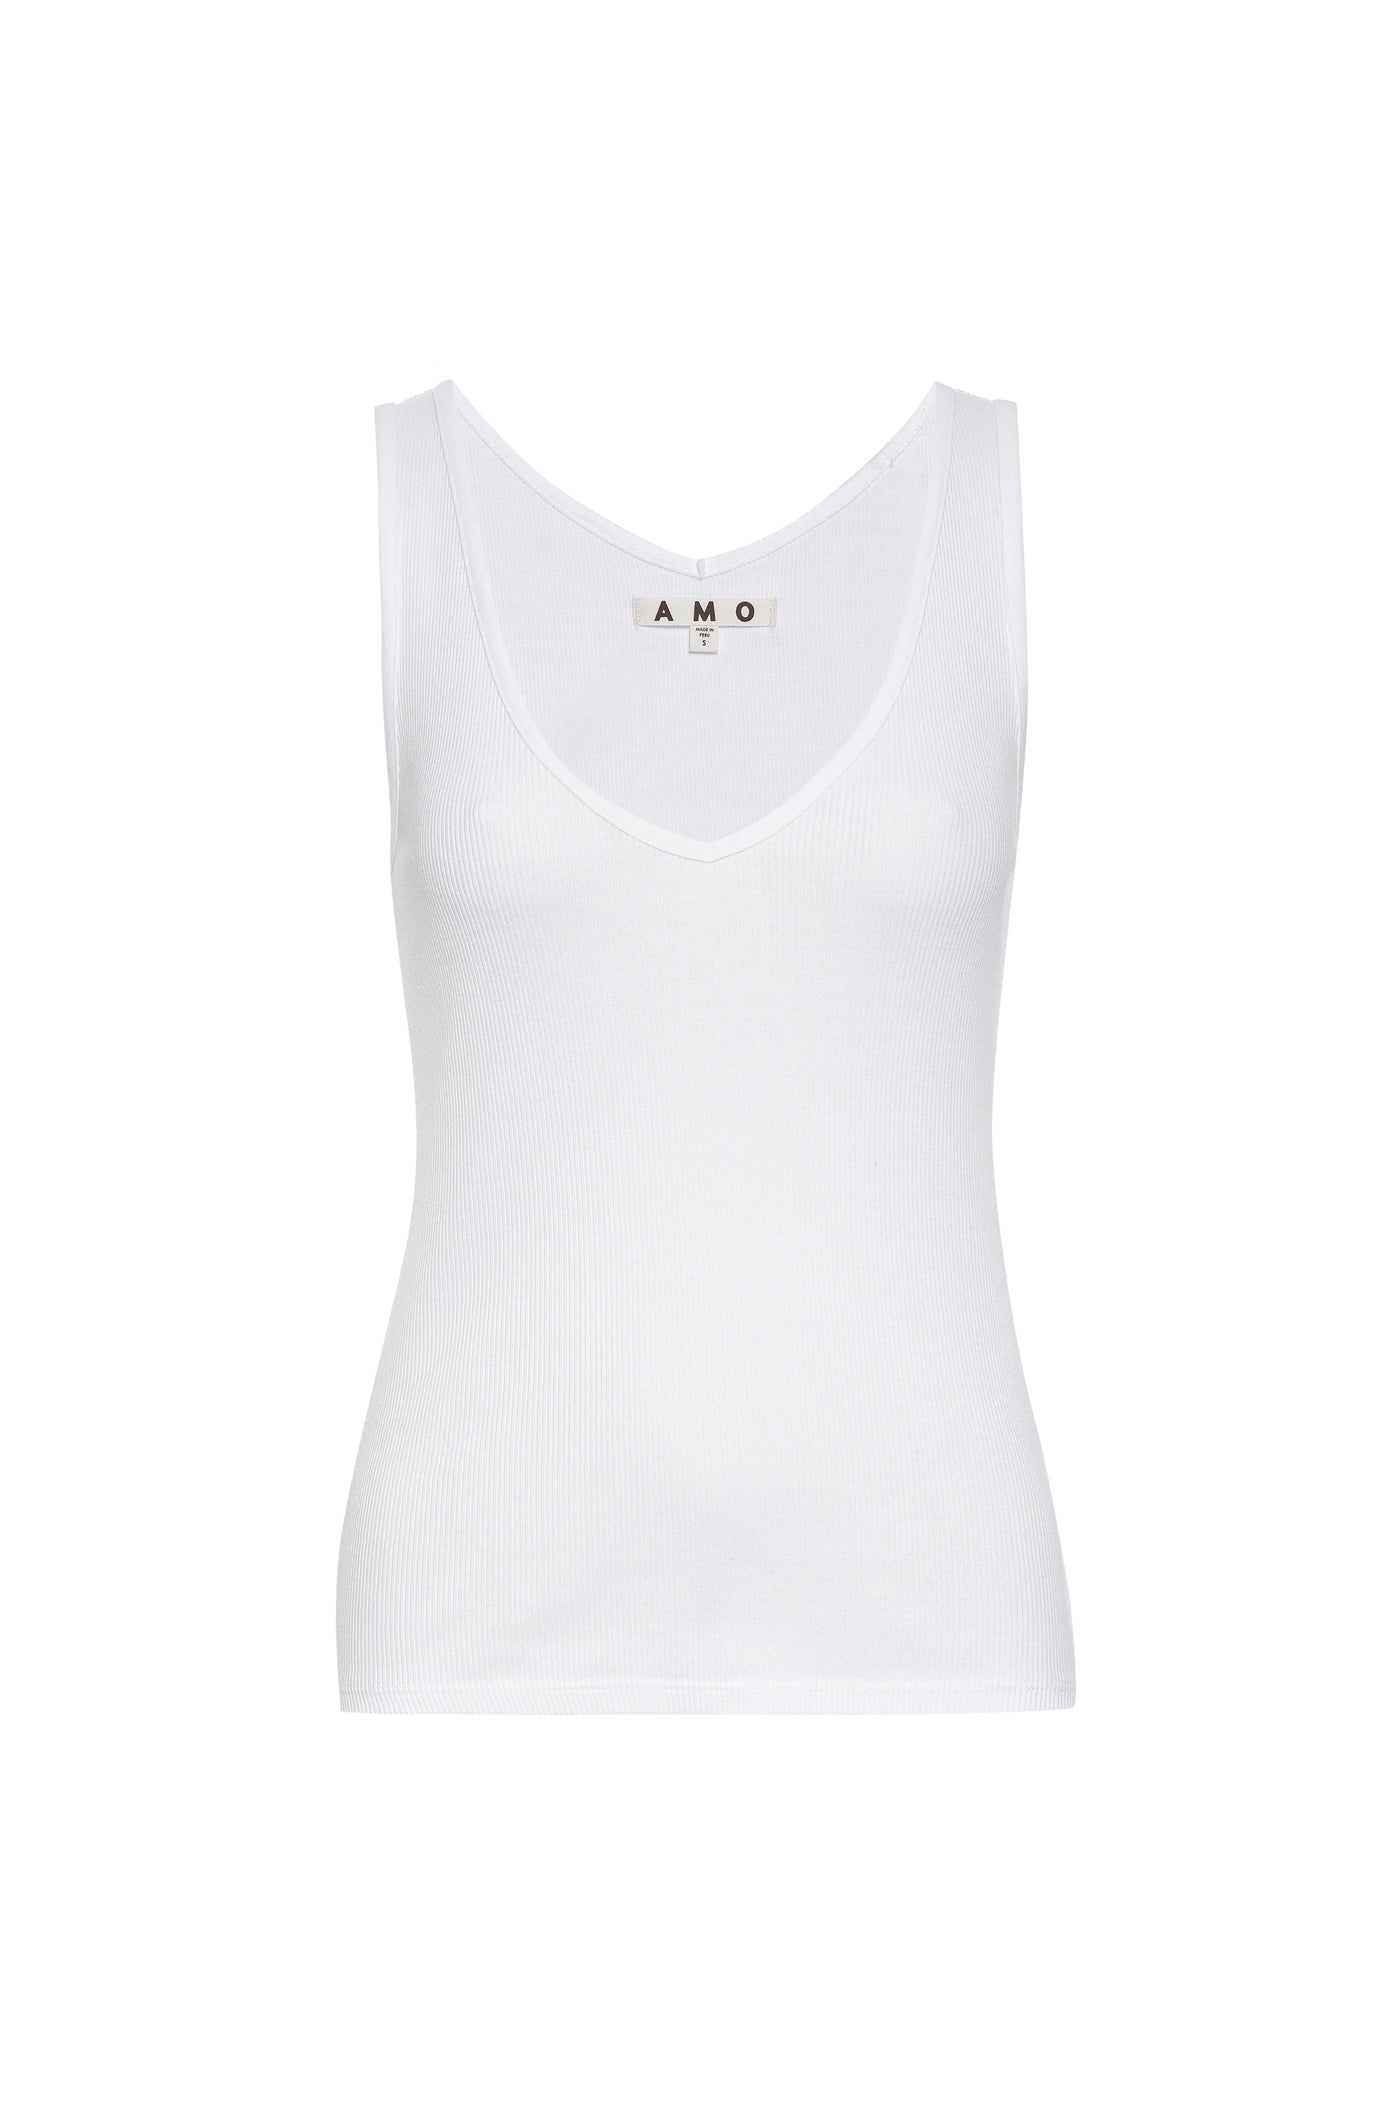 DEEPLY TANK IN WHITE - Romi Boutique